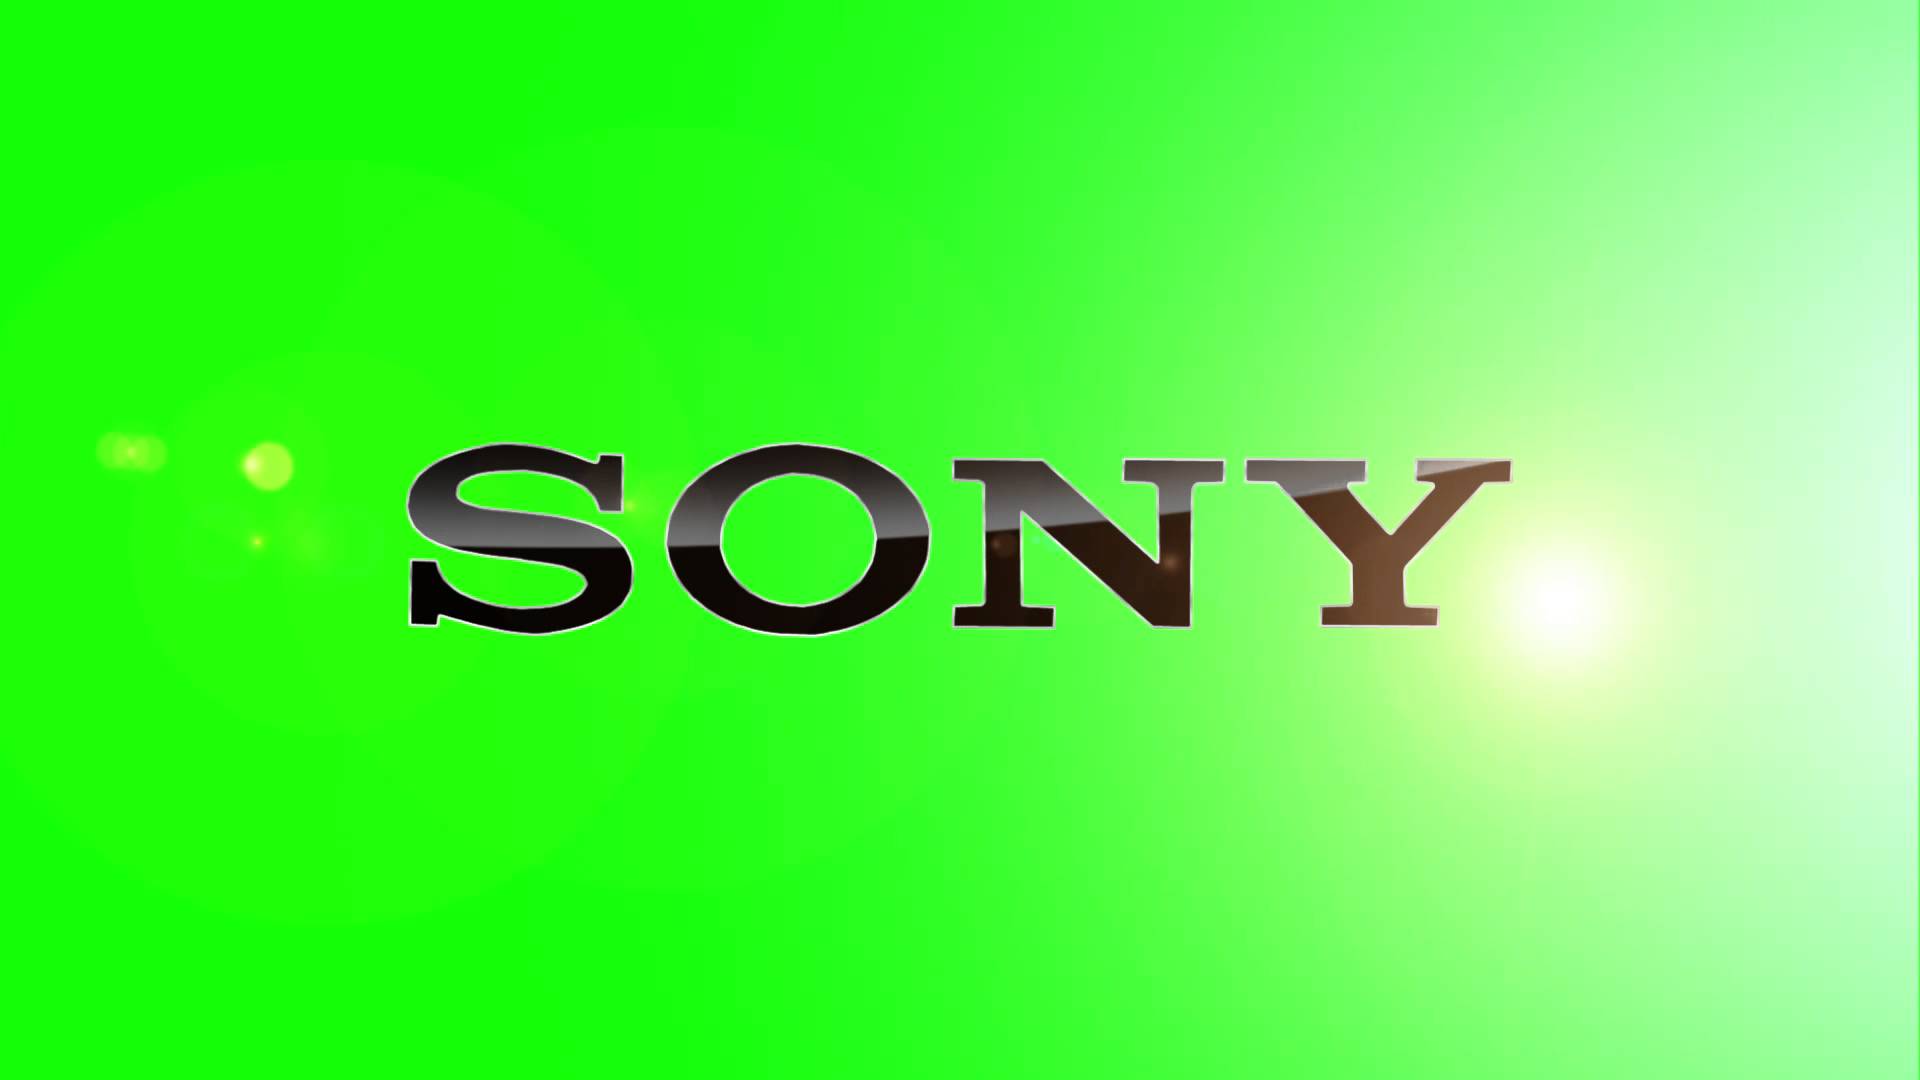 Sony tv change logo 19 November 9 pm | DreamDTH Forums - Television  Discussion Community